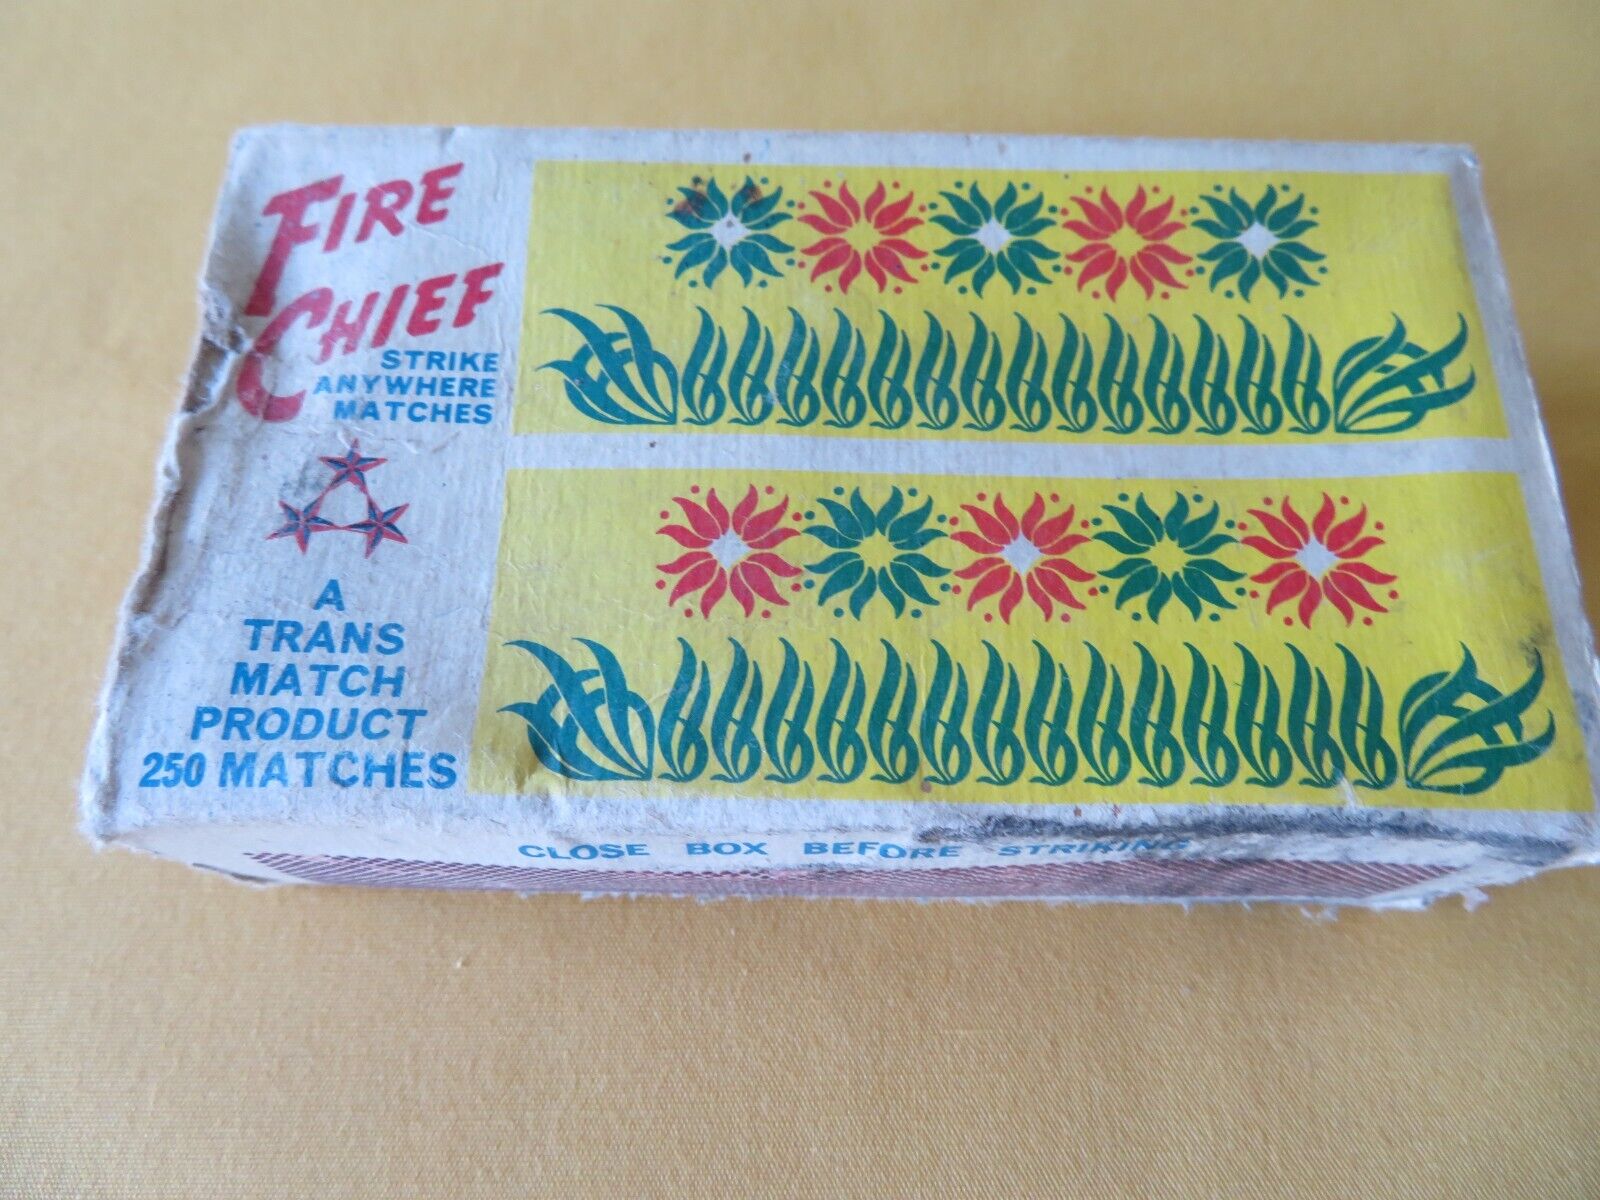 Fire Chief Match Box W/ Over 200 Wooden Matches-trans/match Inc. Kenner,la - Usa